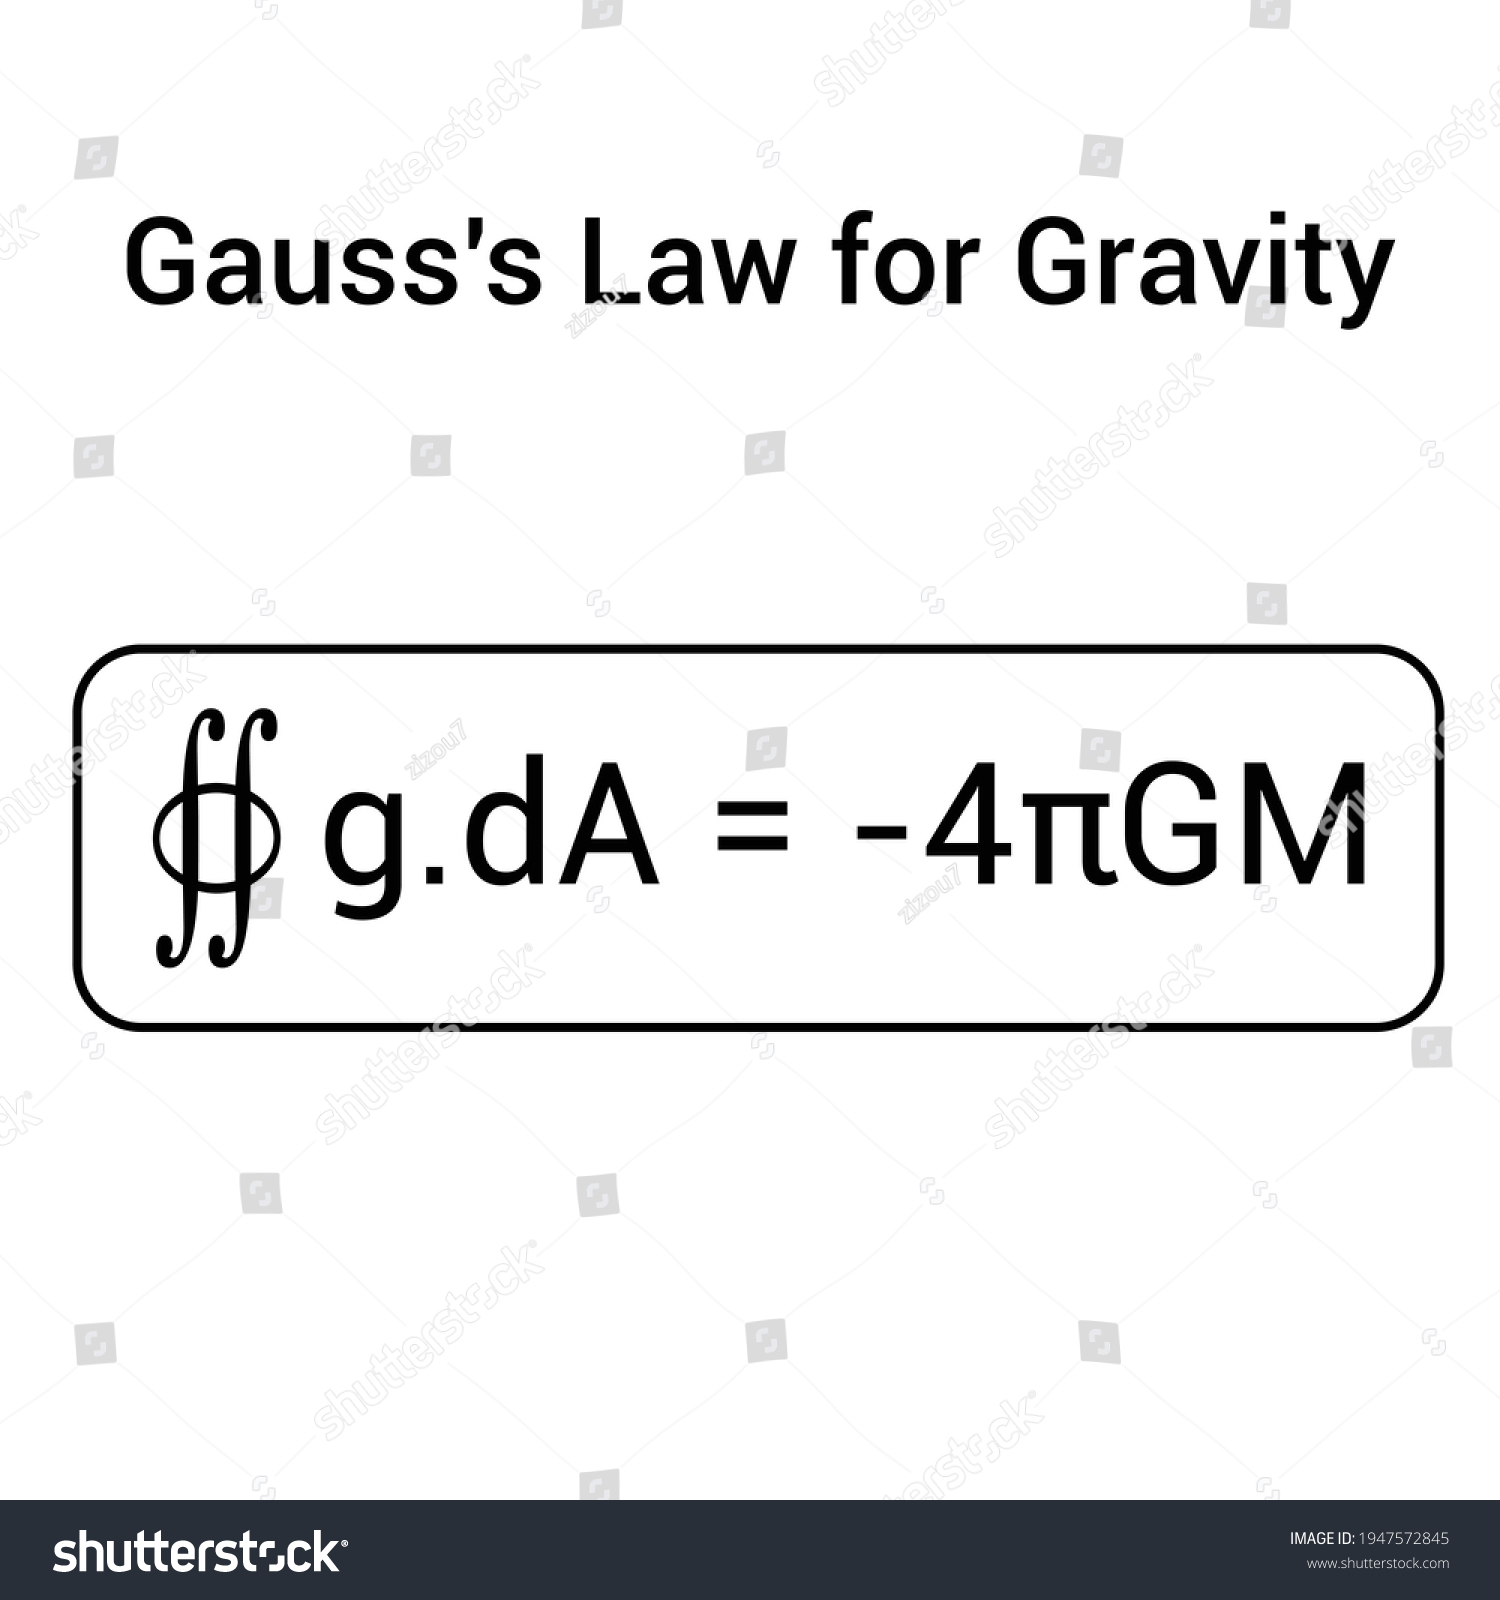 Gausss Law For Gravity Equation Royalty Free Stock Vector 1947572845 5197